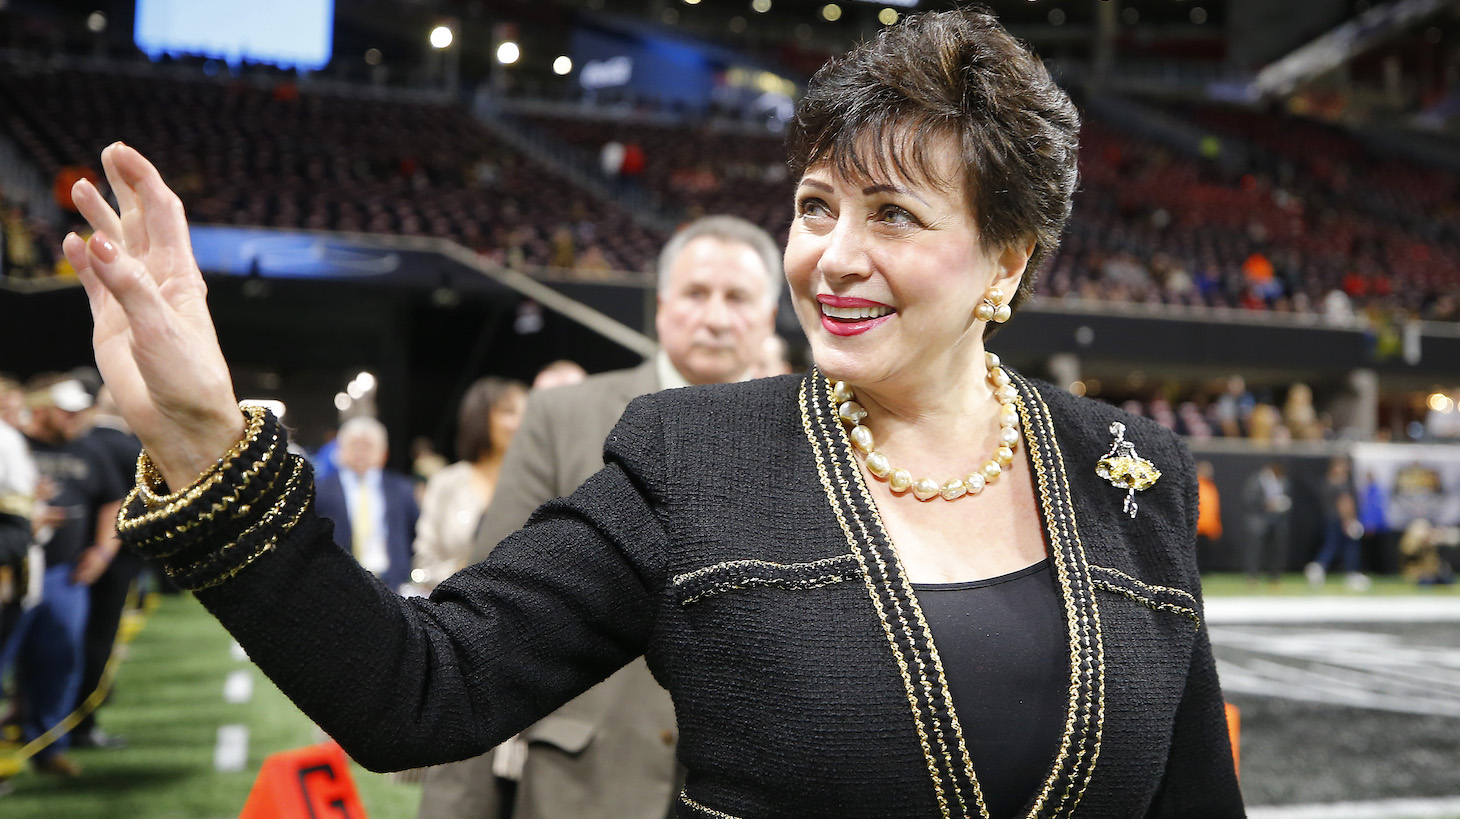 ATLANTA, GEORGIA - NOVEMBER 28: Owner Gayle Benson of the New Orleans Saints walks on the field prior to the game against the Atlanta Falcons at Mercedes-Benz Stadium on November 28, 2019 in Atlanta, Georgia. (Photo by Todd Kirkland/Getty Images)